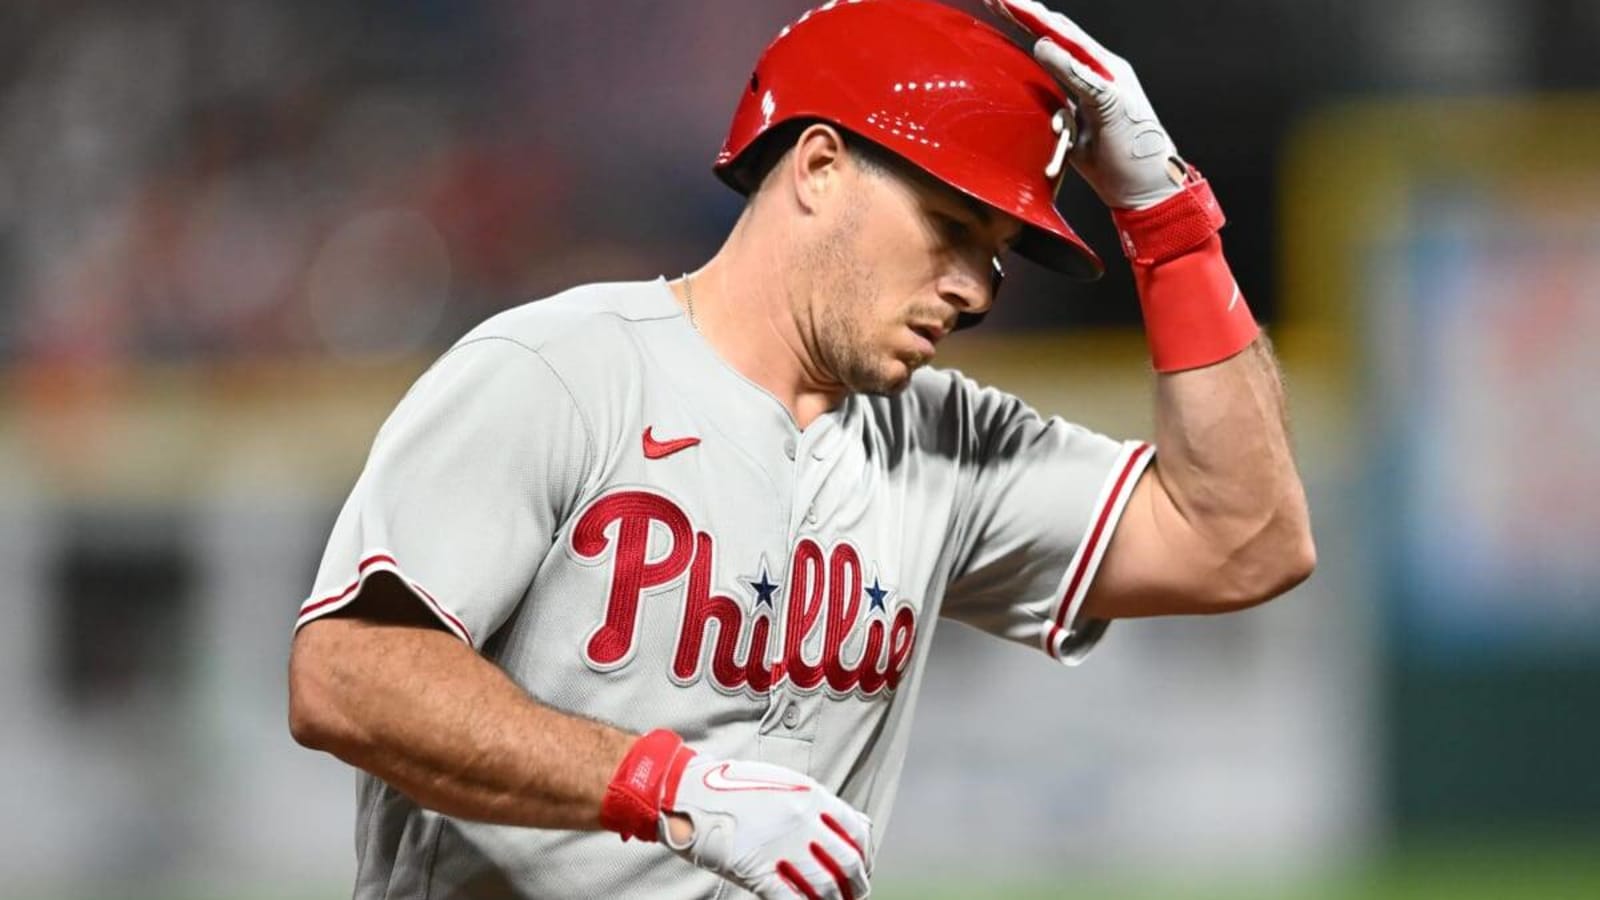 Philadelphia Phillies Catcher J.T. Realmuto Goes Viral For This Hilarious Moment on Friday